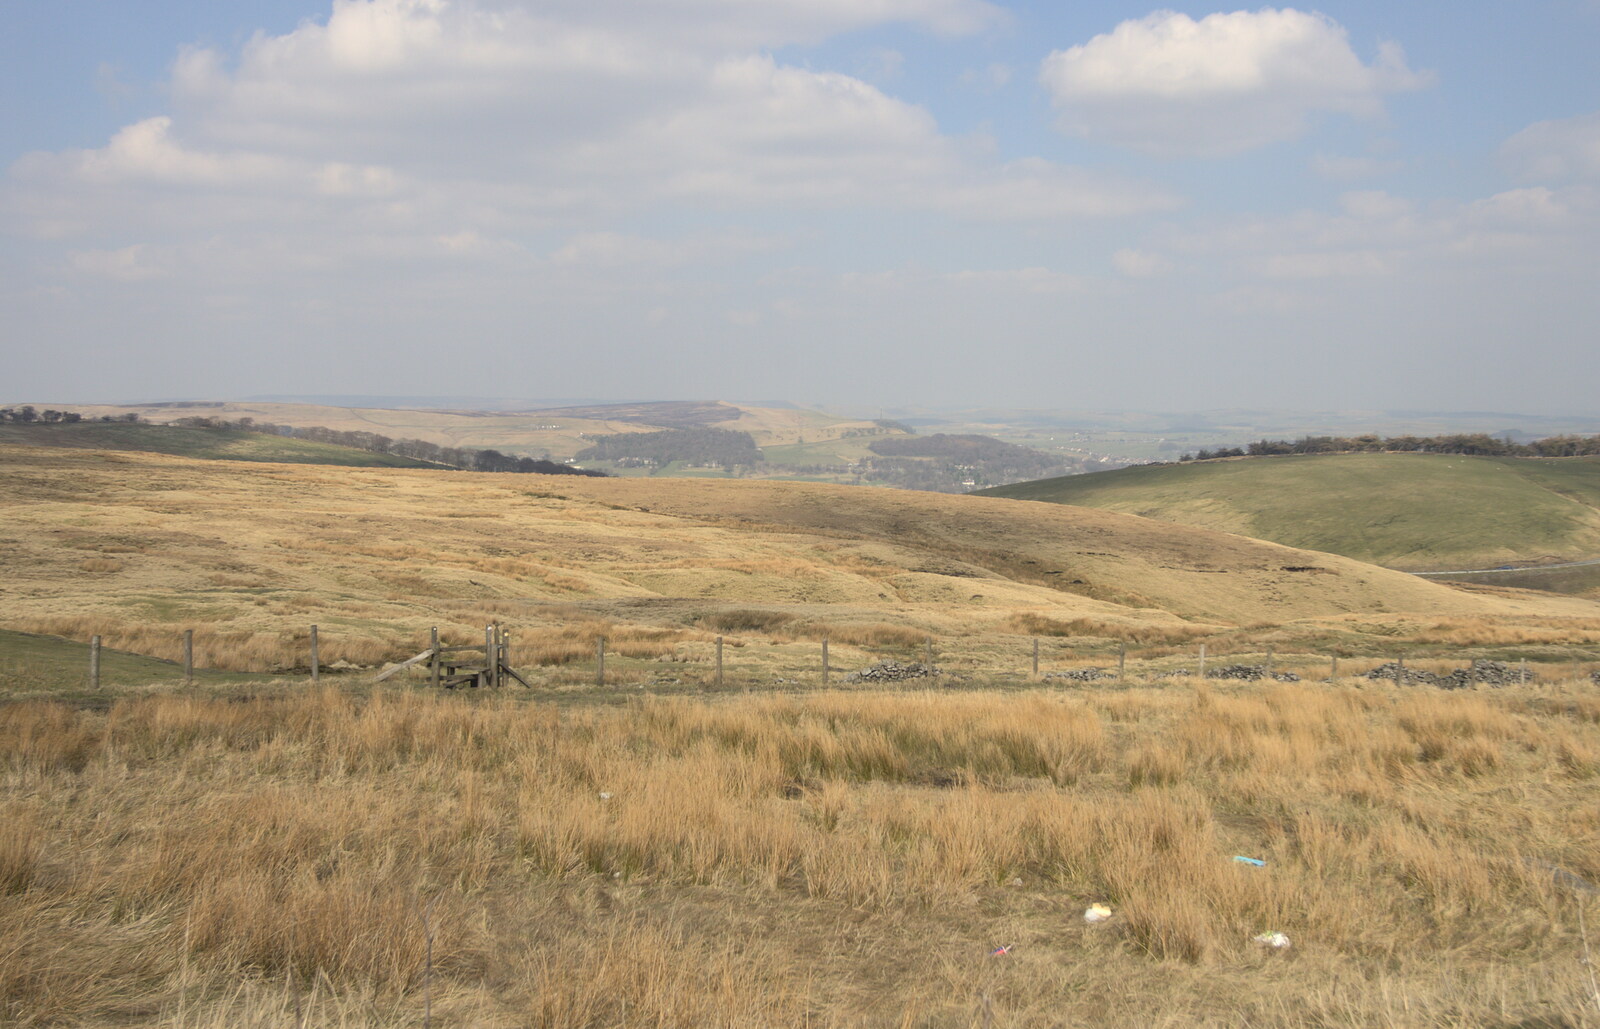 A view of the Pennines from Chesterfield and the Twisty Spire, Derbyshire - 19th April 2013